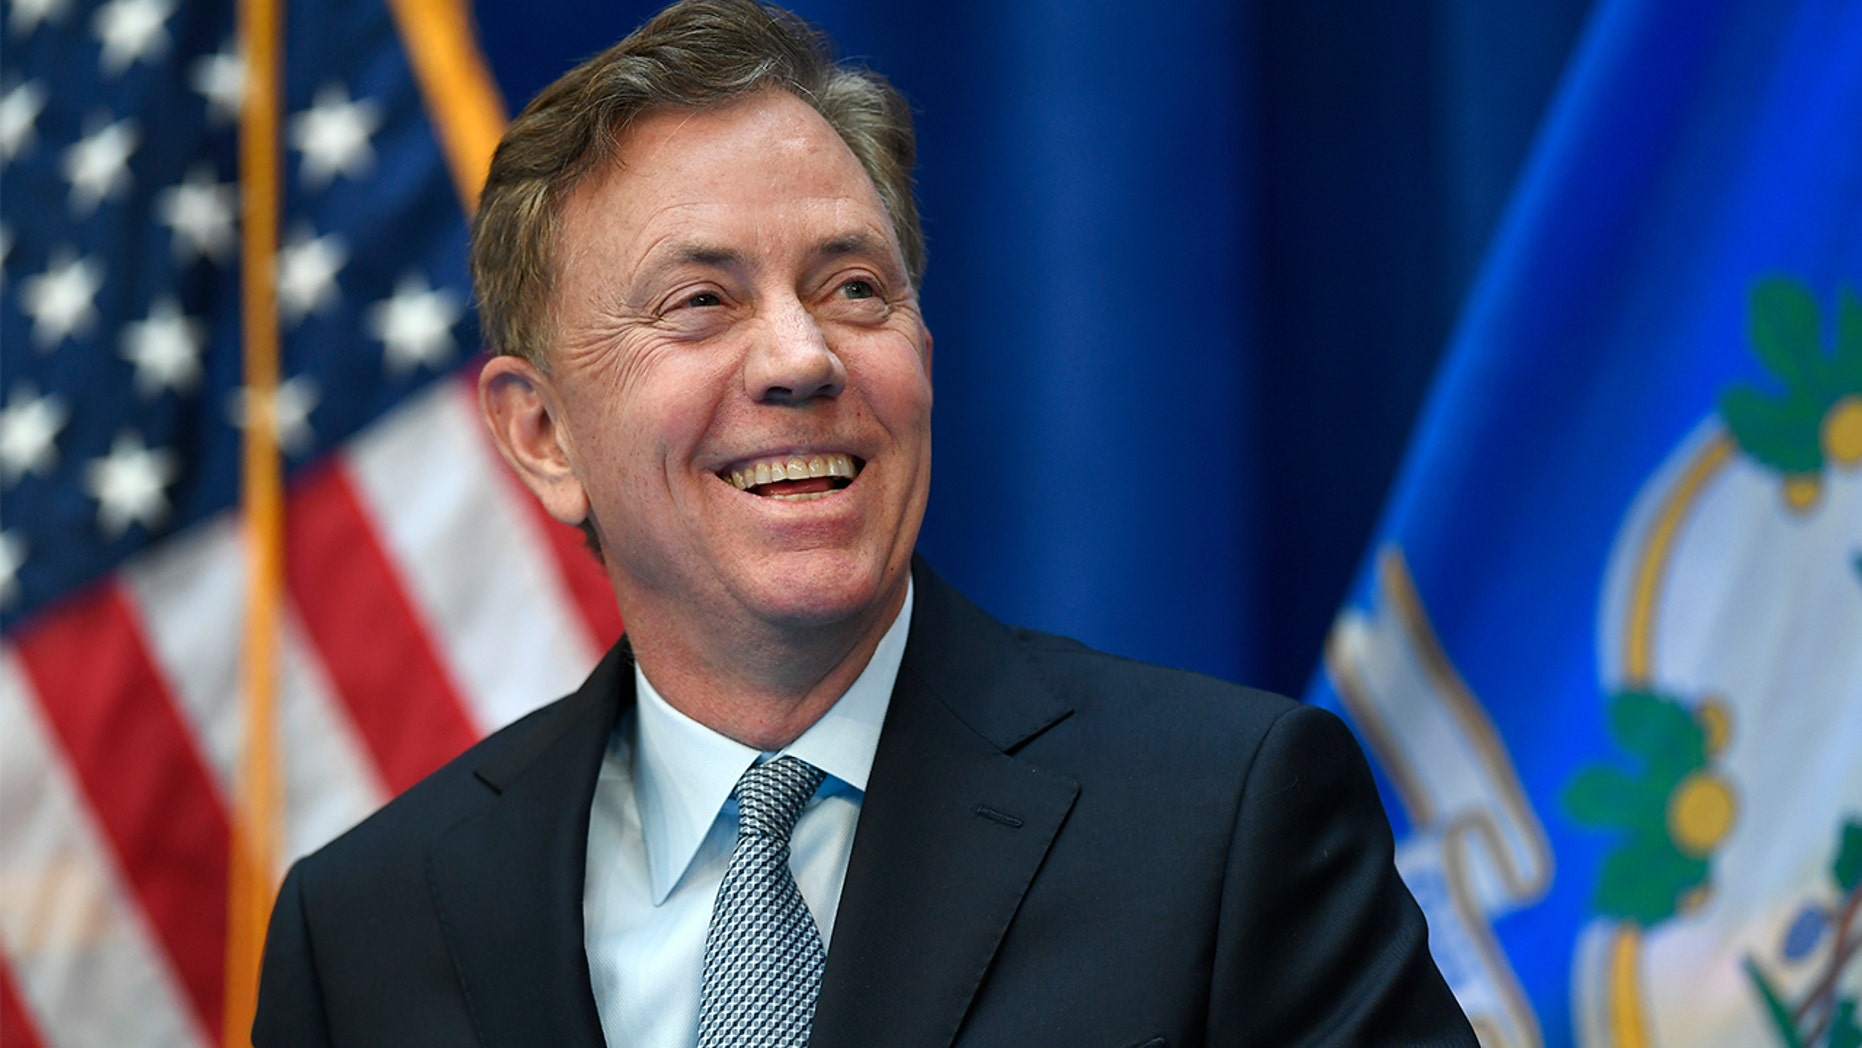 Connecticut Gov. Ned Lamont smiles during his inauguration, Wednesday, Jan. 9, 2019, inside the William A. O'Neill Armory in Hartford Conn. (AP Photo/Jessica Hill, Pool)